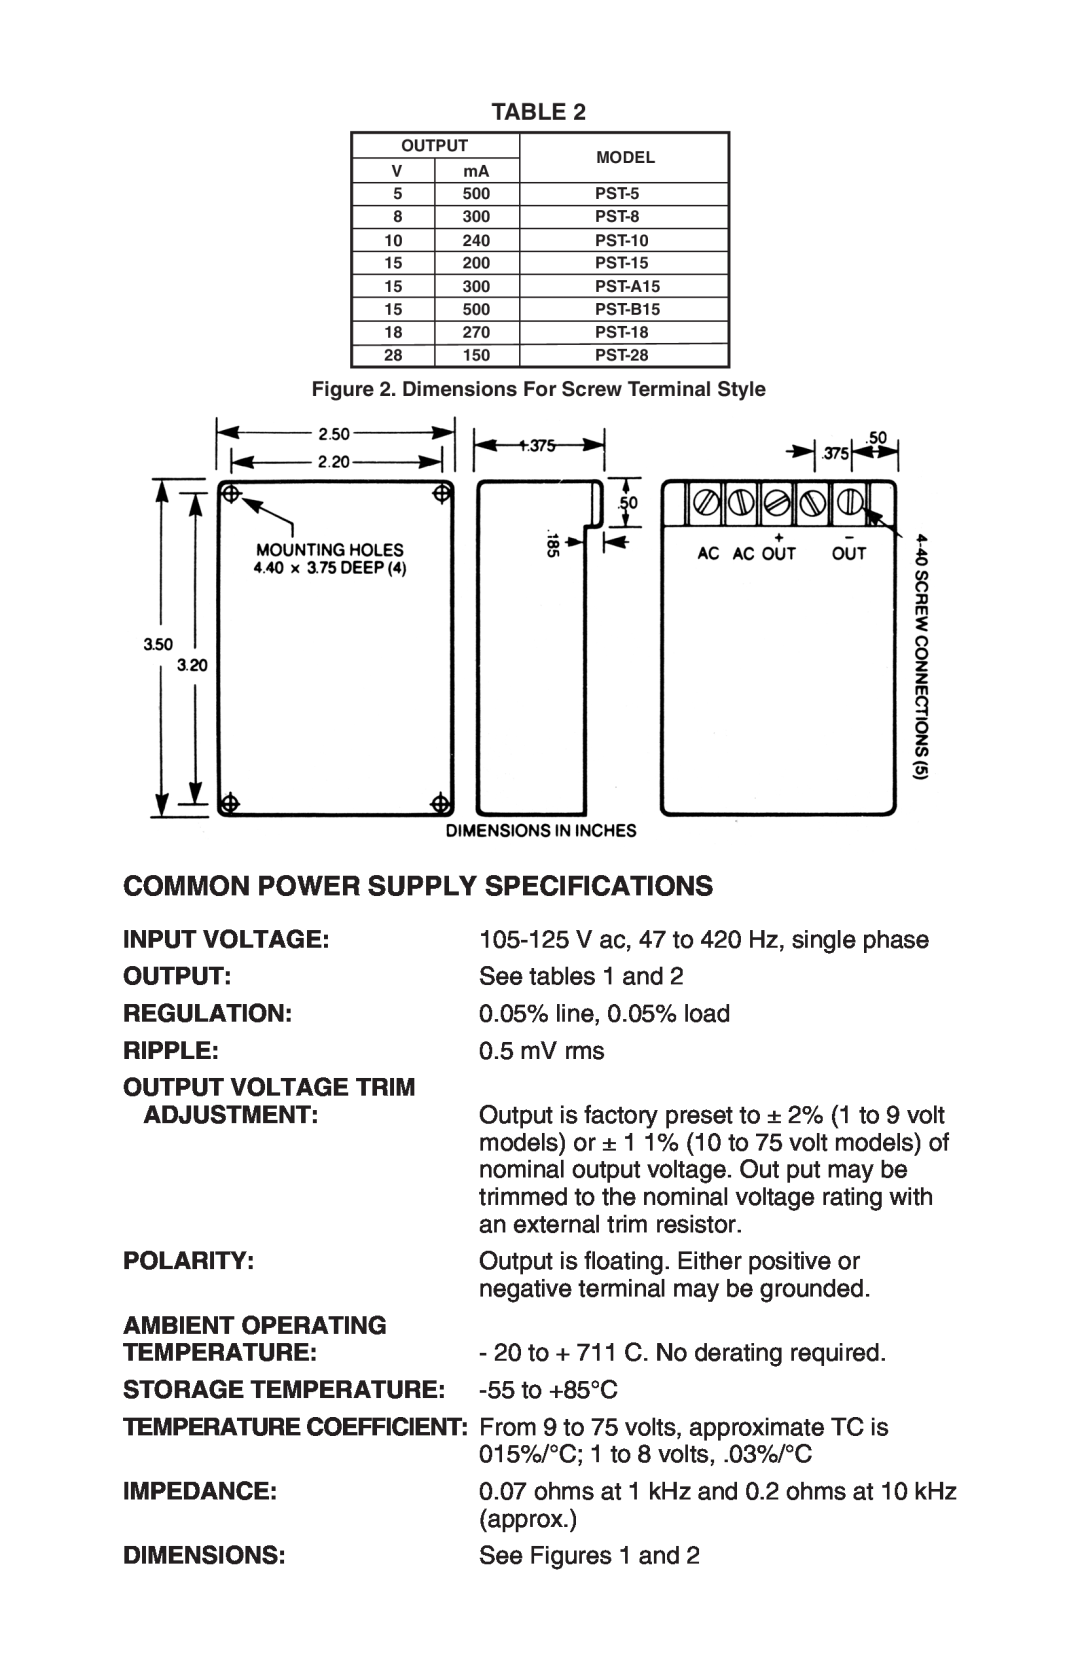 Omega Engineering PST, PSP instruction sheet Common Power Supply Specifications 